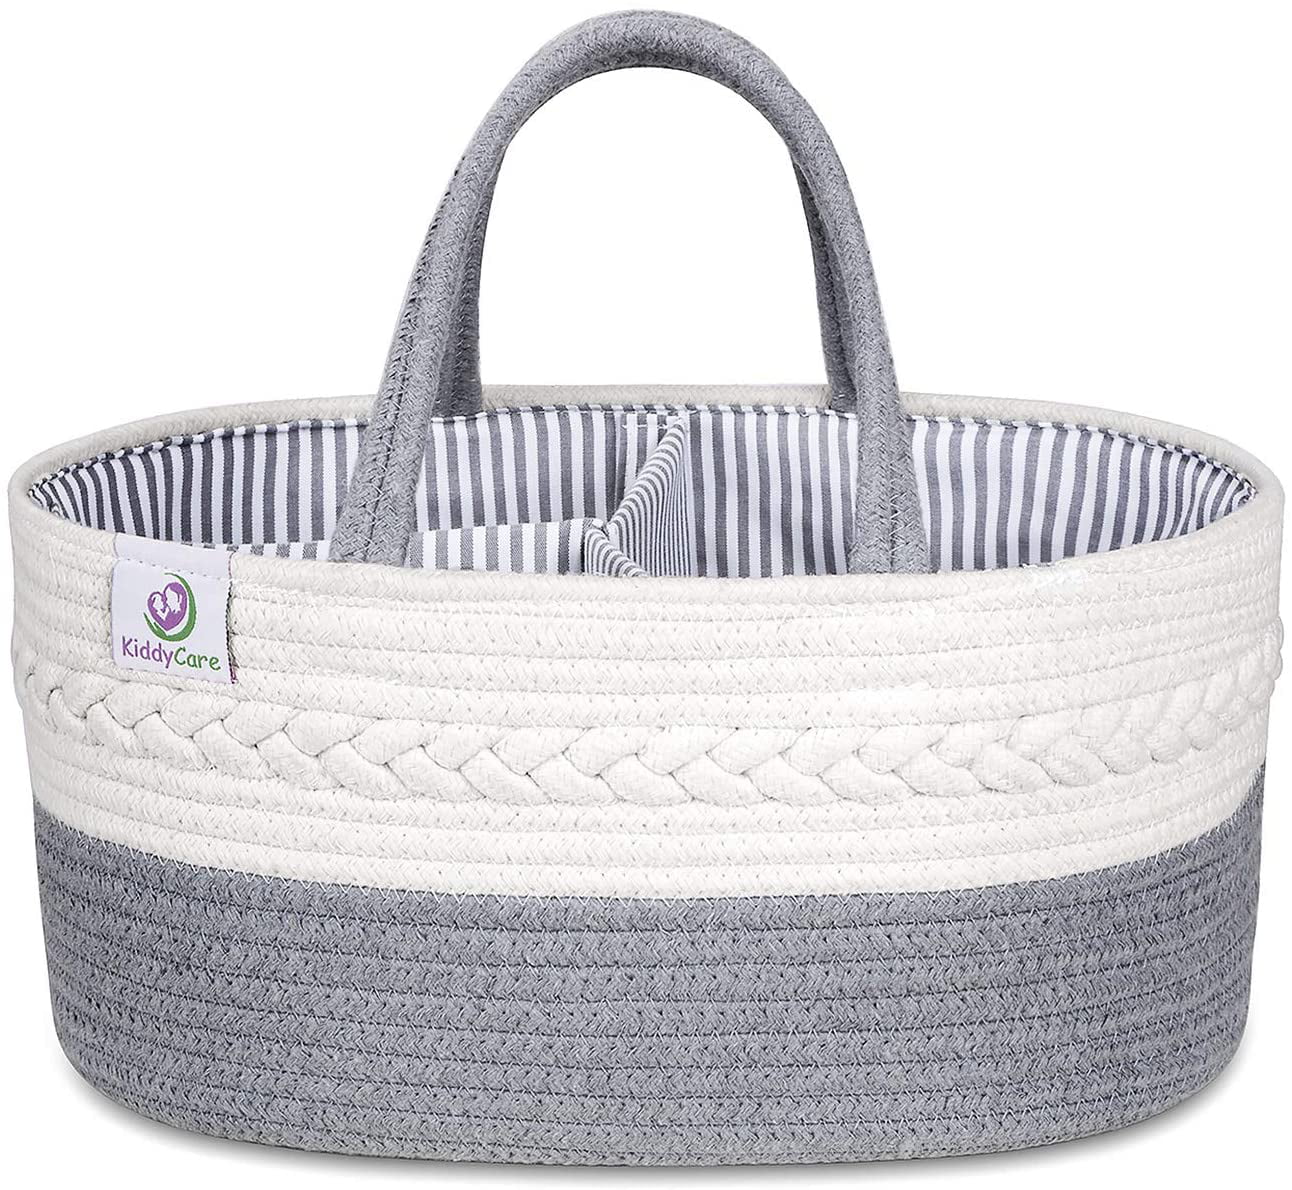 Baby Diaper Caddy Organizer-Baby Basket Bin with Removable Divider Portable Tote Bag for Changing Table & Cars,Cotton Rope Basket Baby Shower Basket 